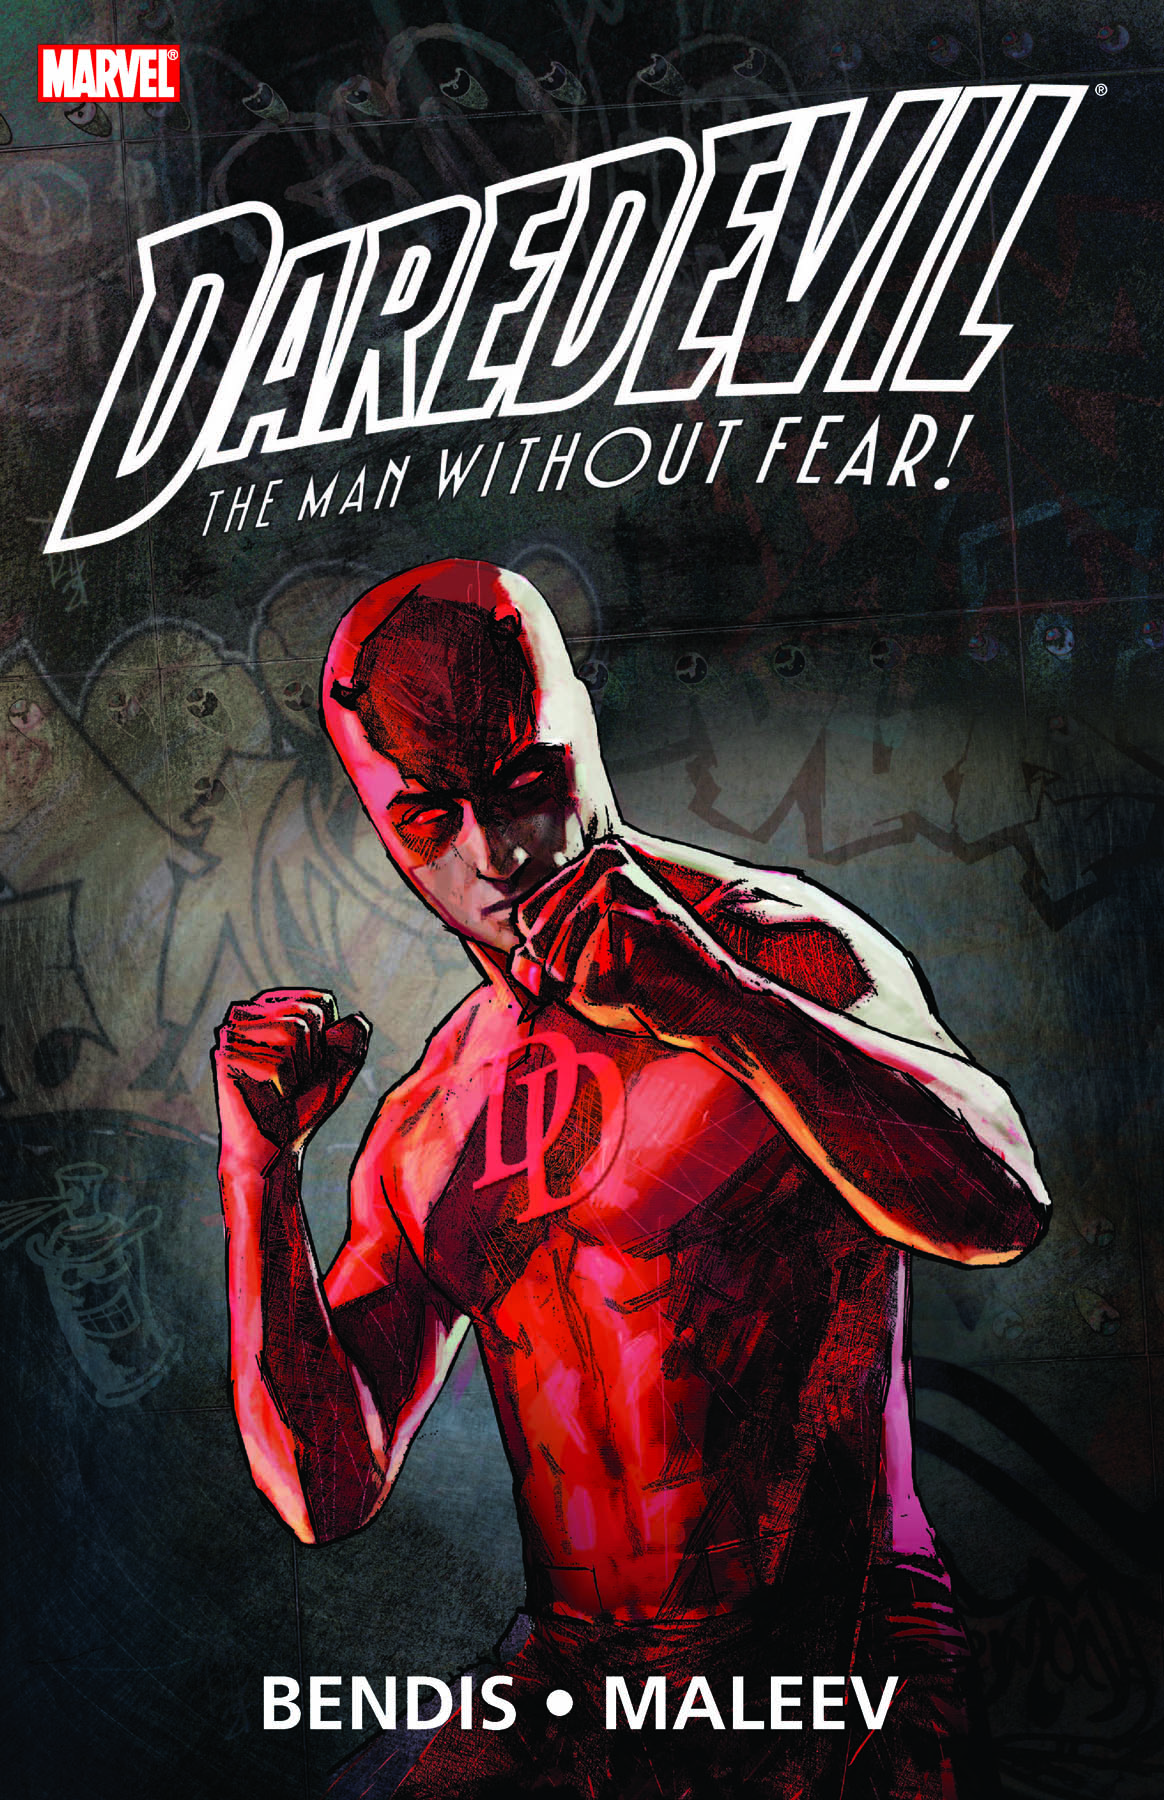 DAREDEVIL BY BRIAN MICHAEL BENDIS & ALEX MALEEV ULTIMATE COLLECTION BOOK 2 TPB (Trade Paperback)